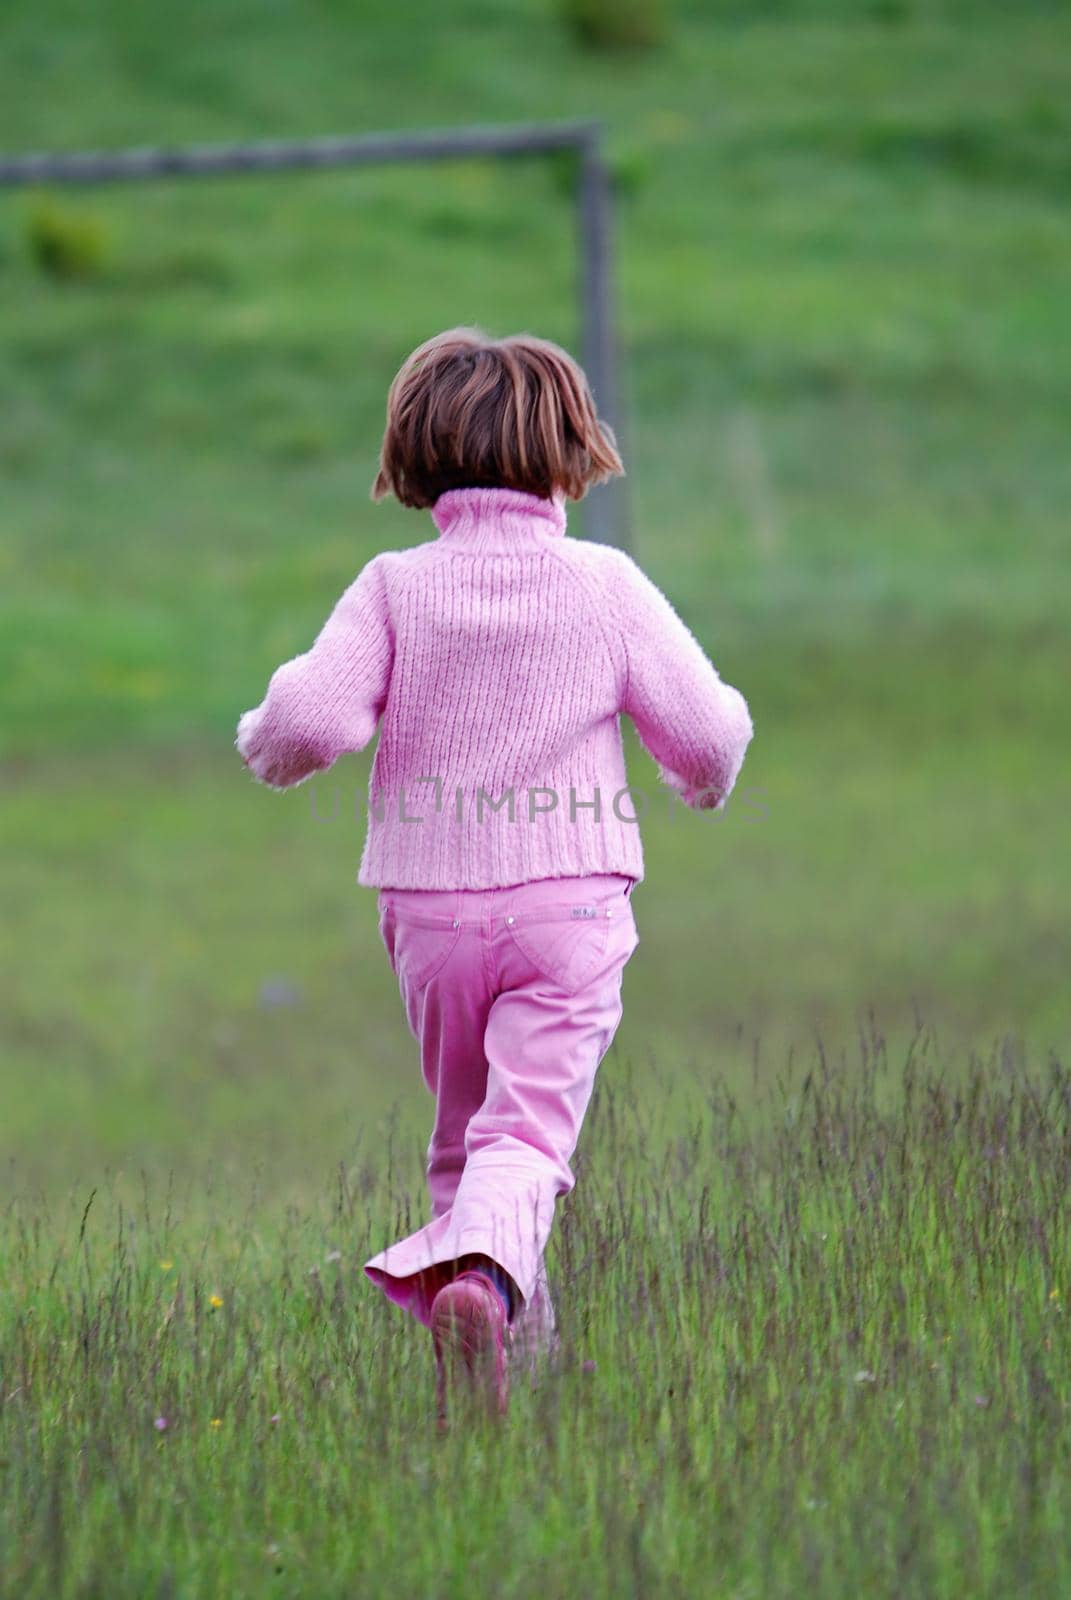 girl running in nature   (NIKON D80; 2.6.2007; 1/320 at f/6.3; ISO 320; white balance: Auto; focal length: 320 mm)